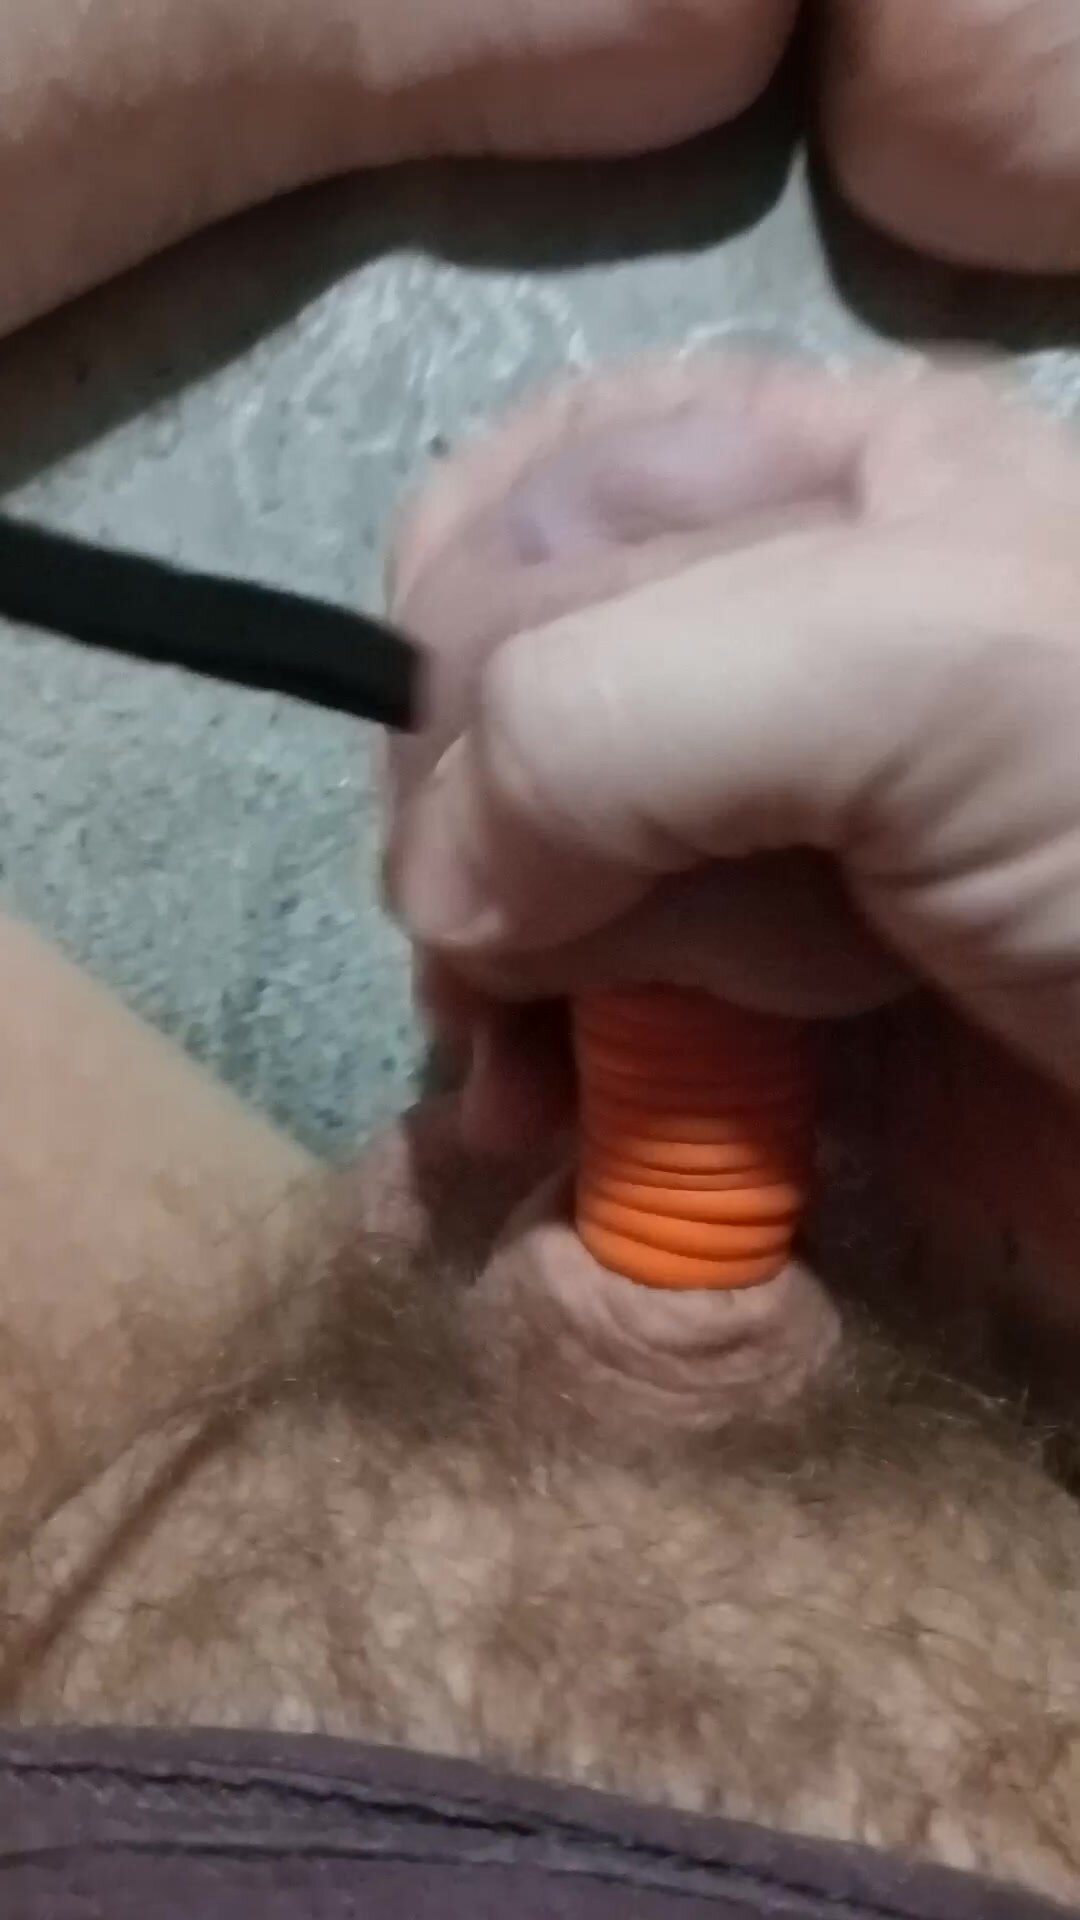 Band my cock for 15 minutes part one